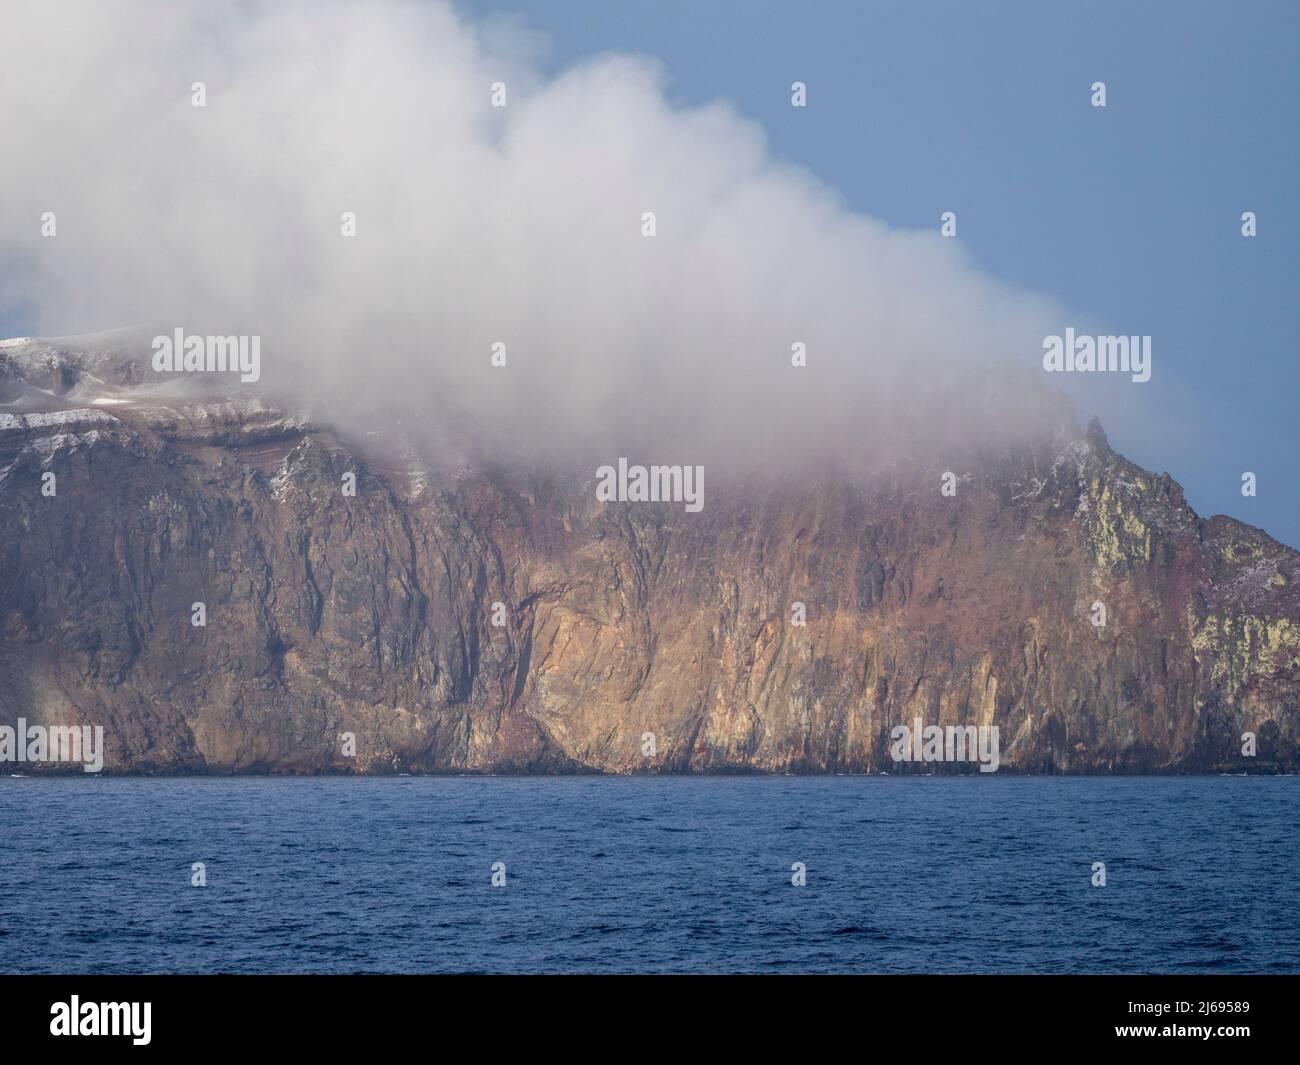 A view of Lucifer Hill on Candlemas Island, an uninhabited volcanic Island in the South Sandwich Islands, South Atlantic, Polar Regions Stock Photo